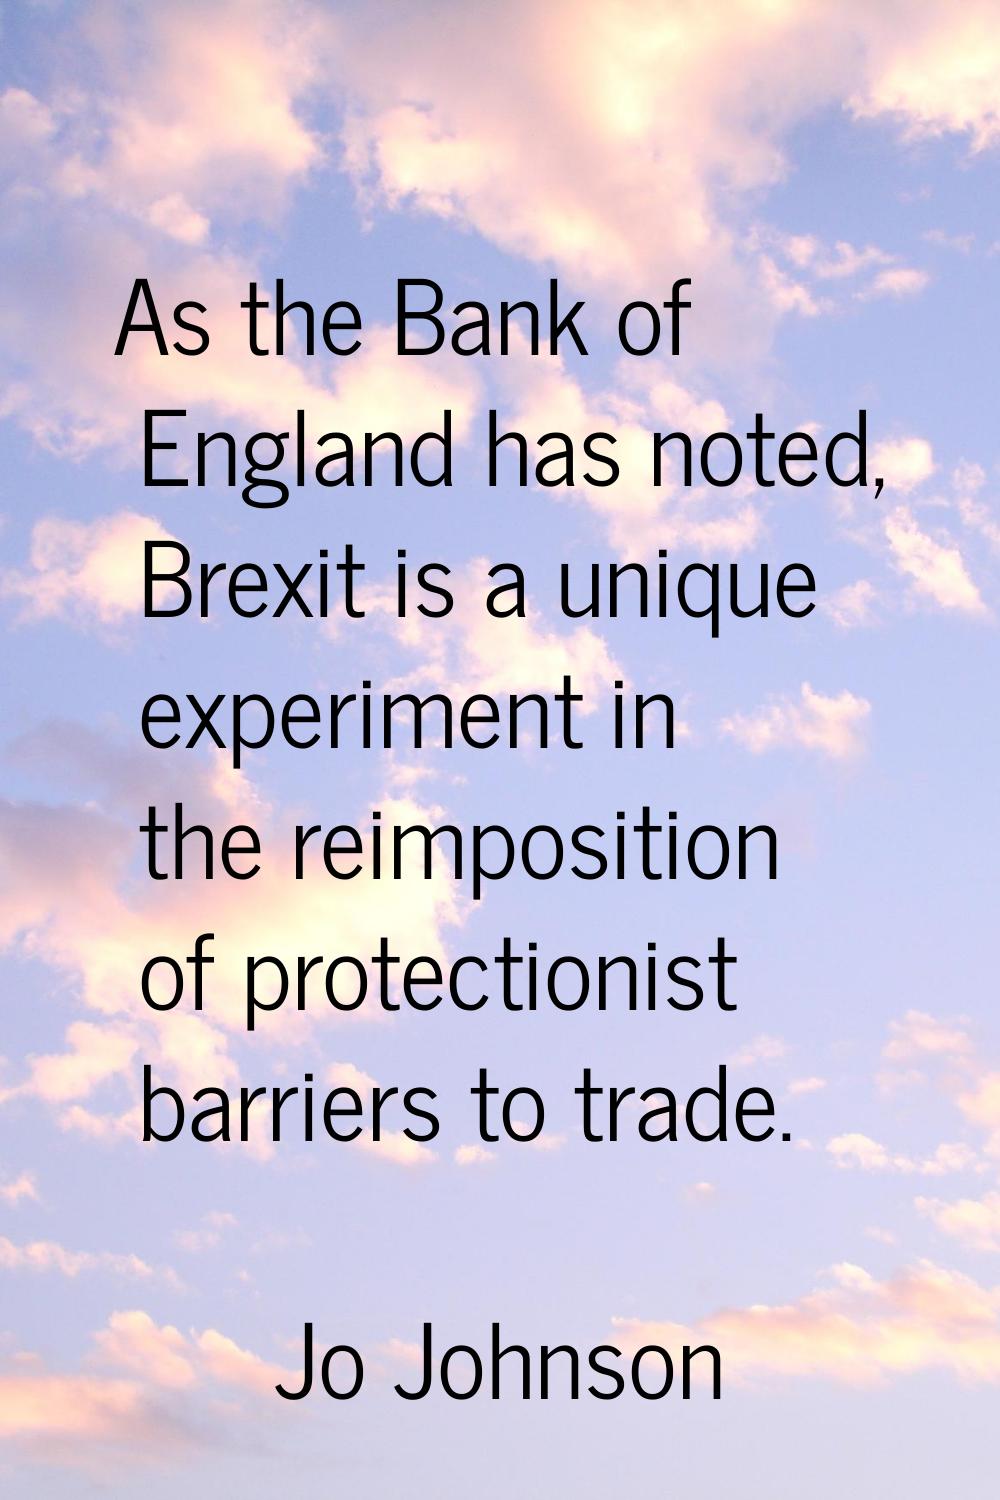 As the Bank of England has noted, Brexit is a unique experiment in the reimposition of protectionis